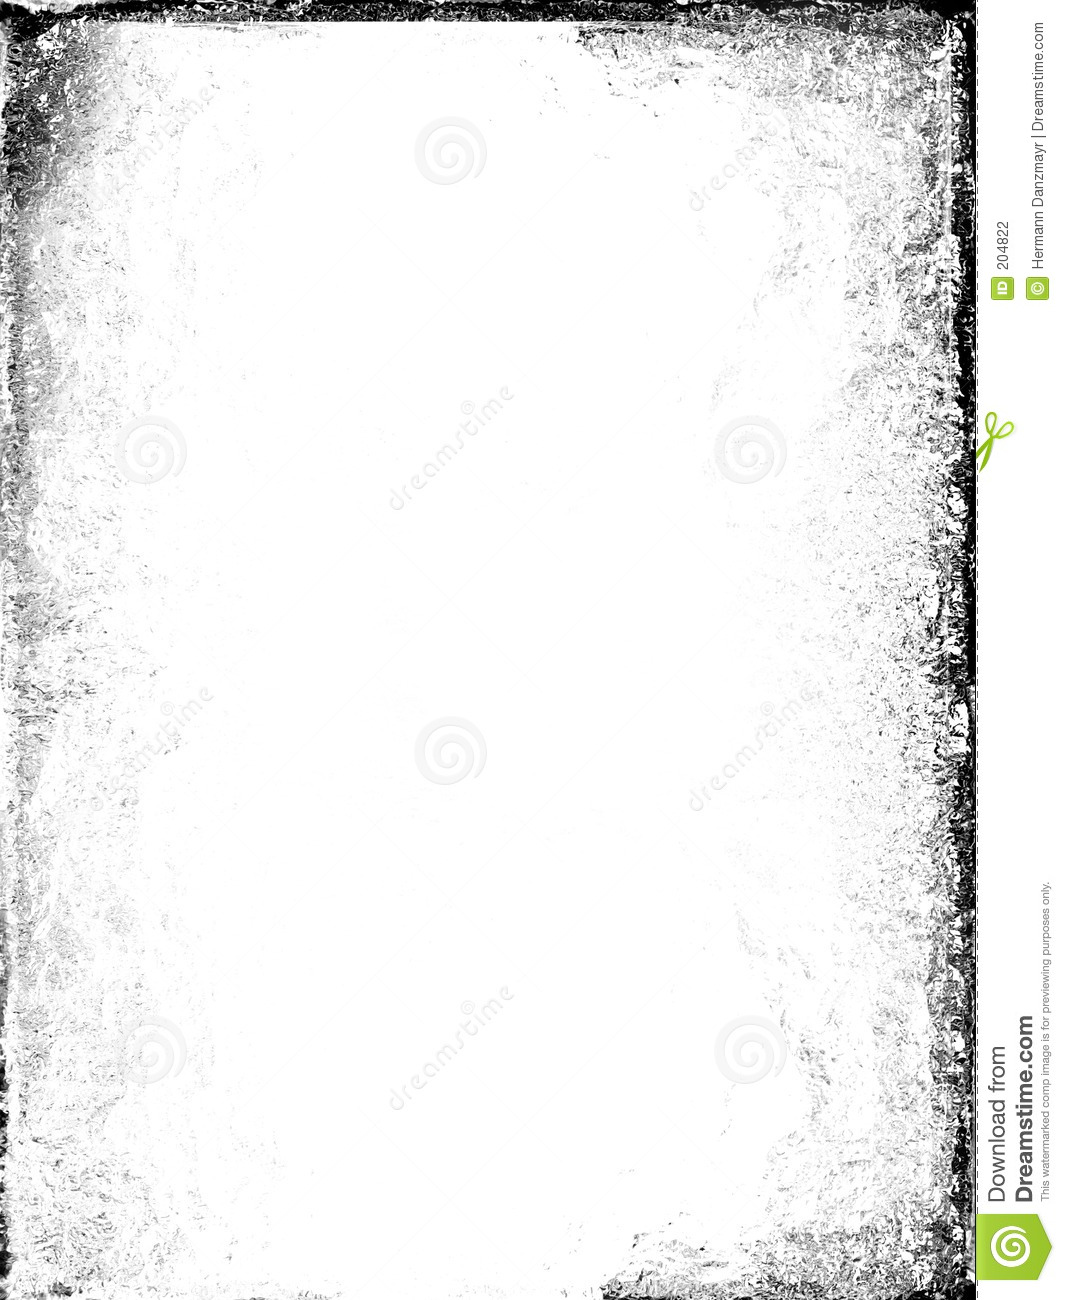 Cool Black and White Borders